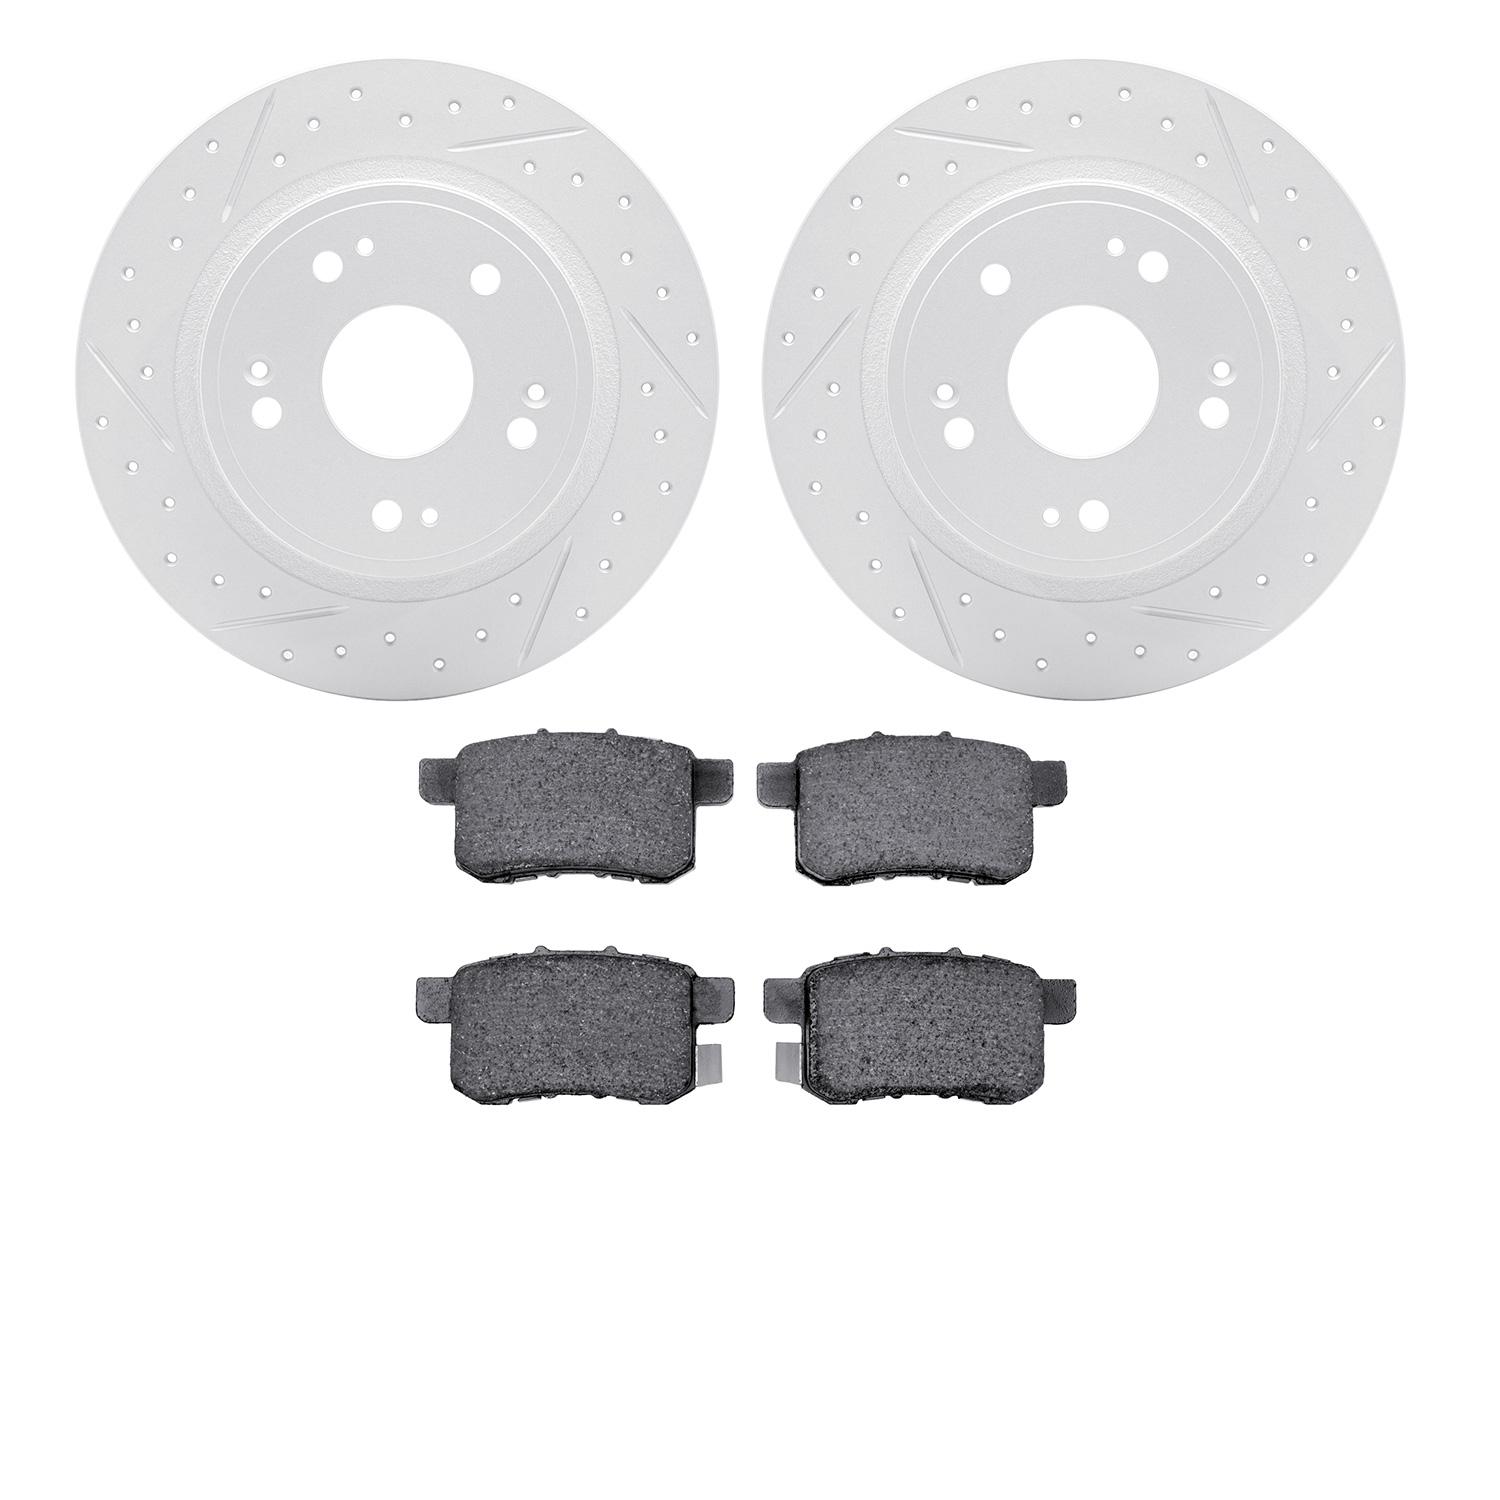 2502-59032 Geoperformance Drilled/Slotted Rotors w/5000 Advanced Brake Pads Kit, 2008-2017 Acura/Honda, Position: Rear